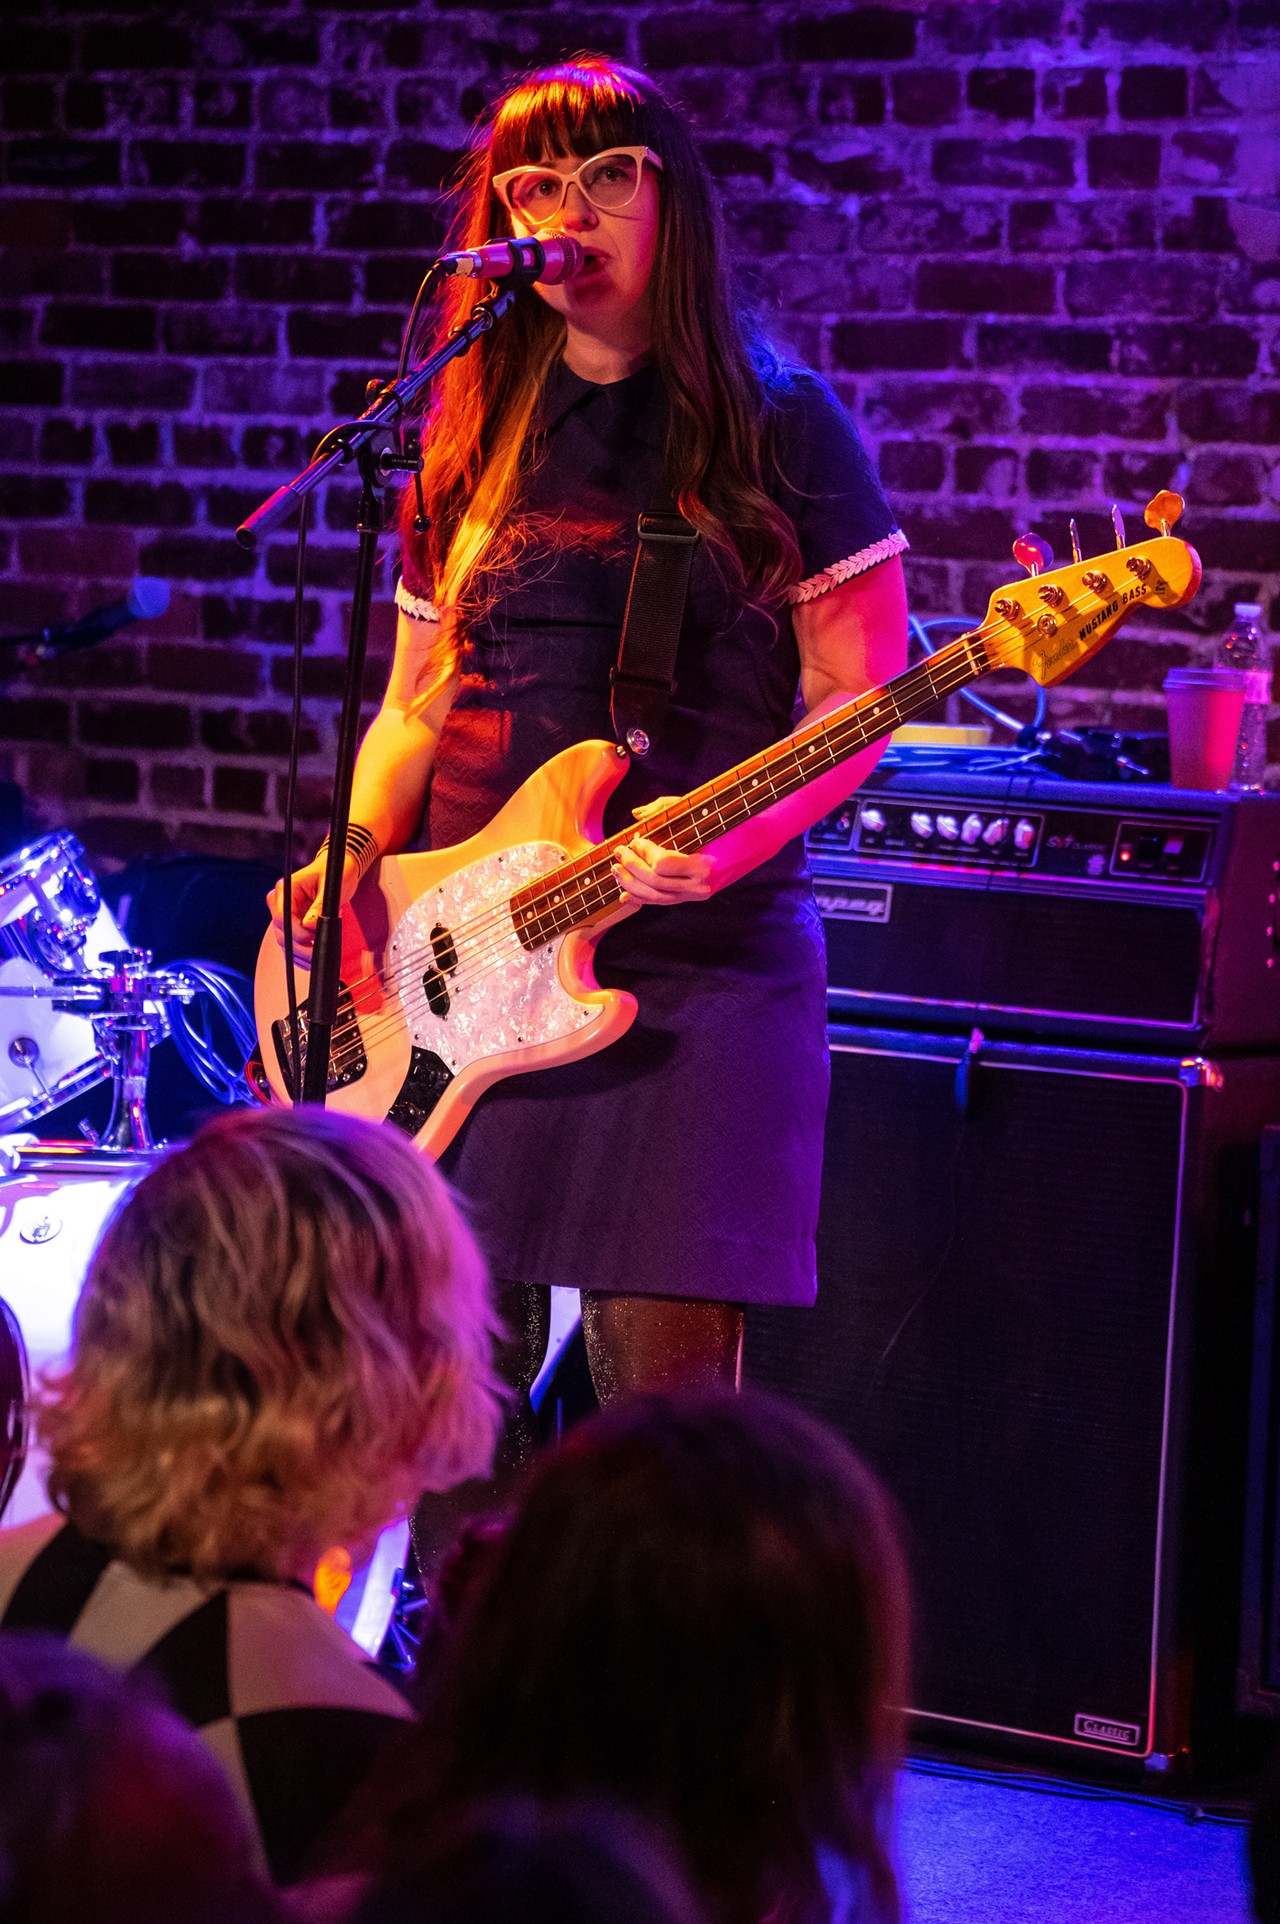 Otoboke Beaver and the Pauses sparked an ecstatic frenzy at the Social in Orlando